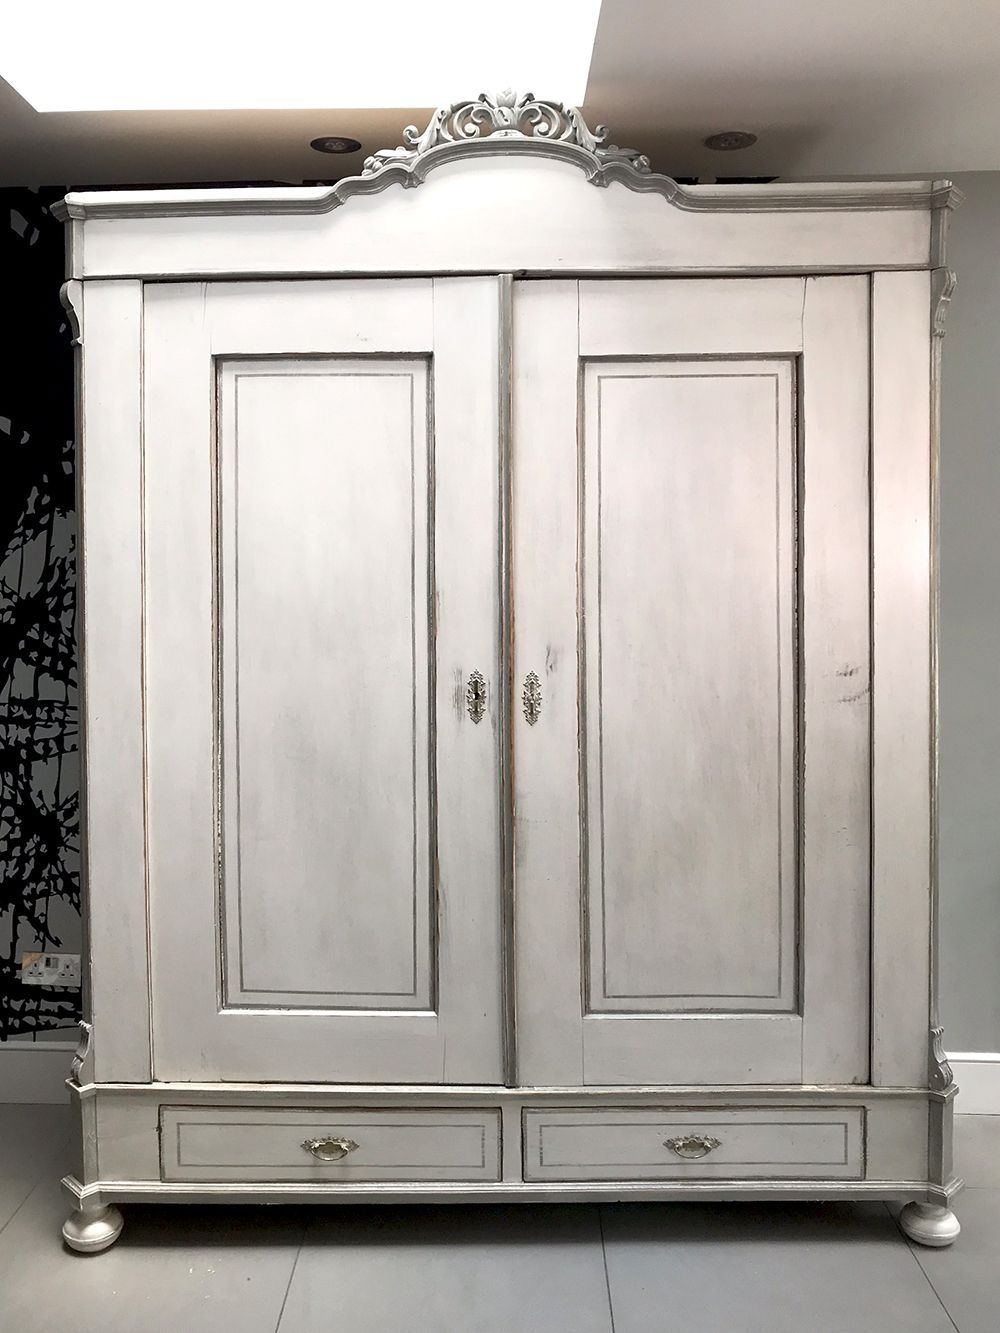 Antique French Painted Armoire – Sold | Napoleonrockefeller – Vintage And  Retro Furniture, Bespoke Hand Crafted Chairs And Seating For French Armoire Wardrobes (View 16 of 20)